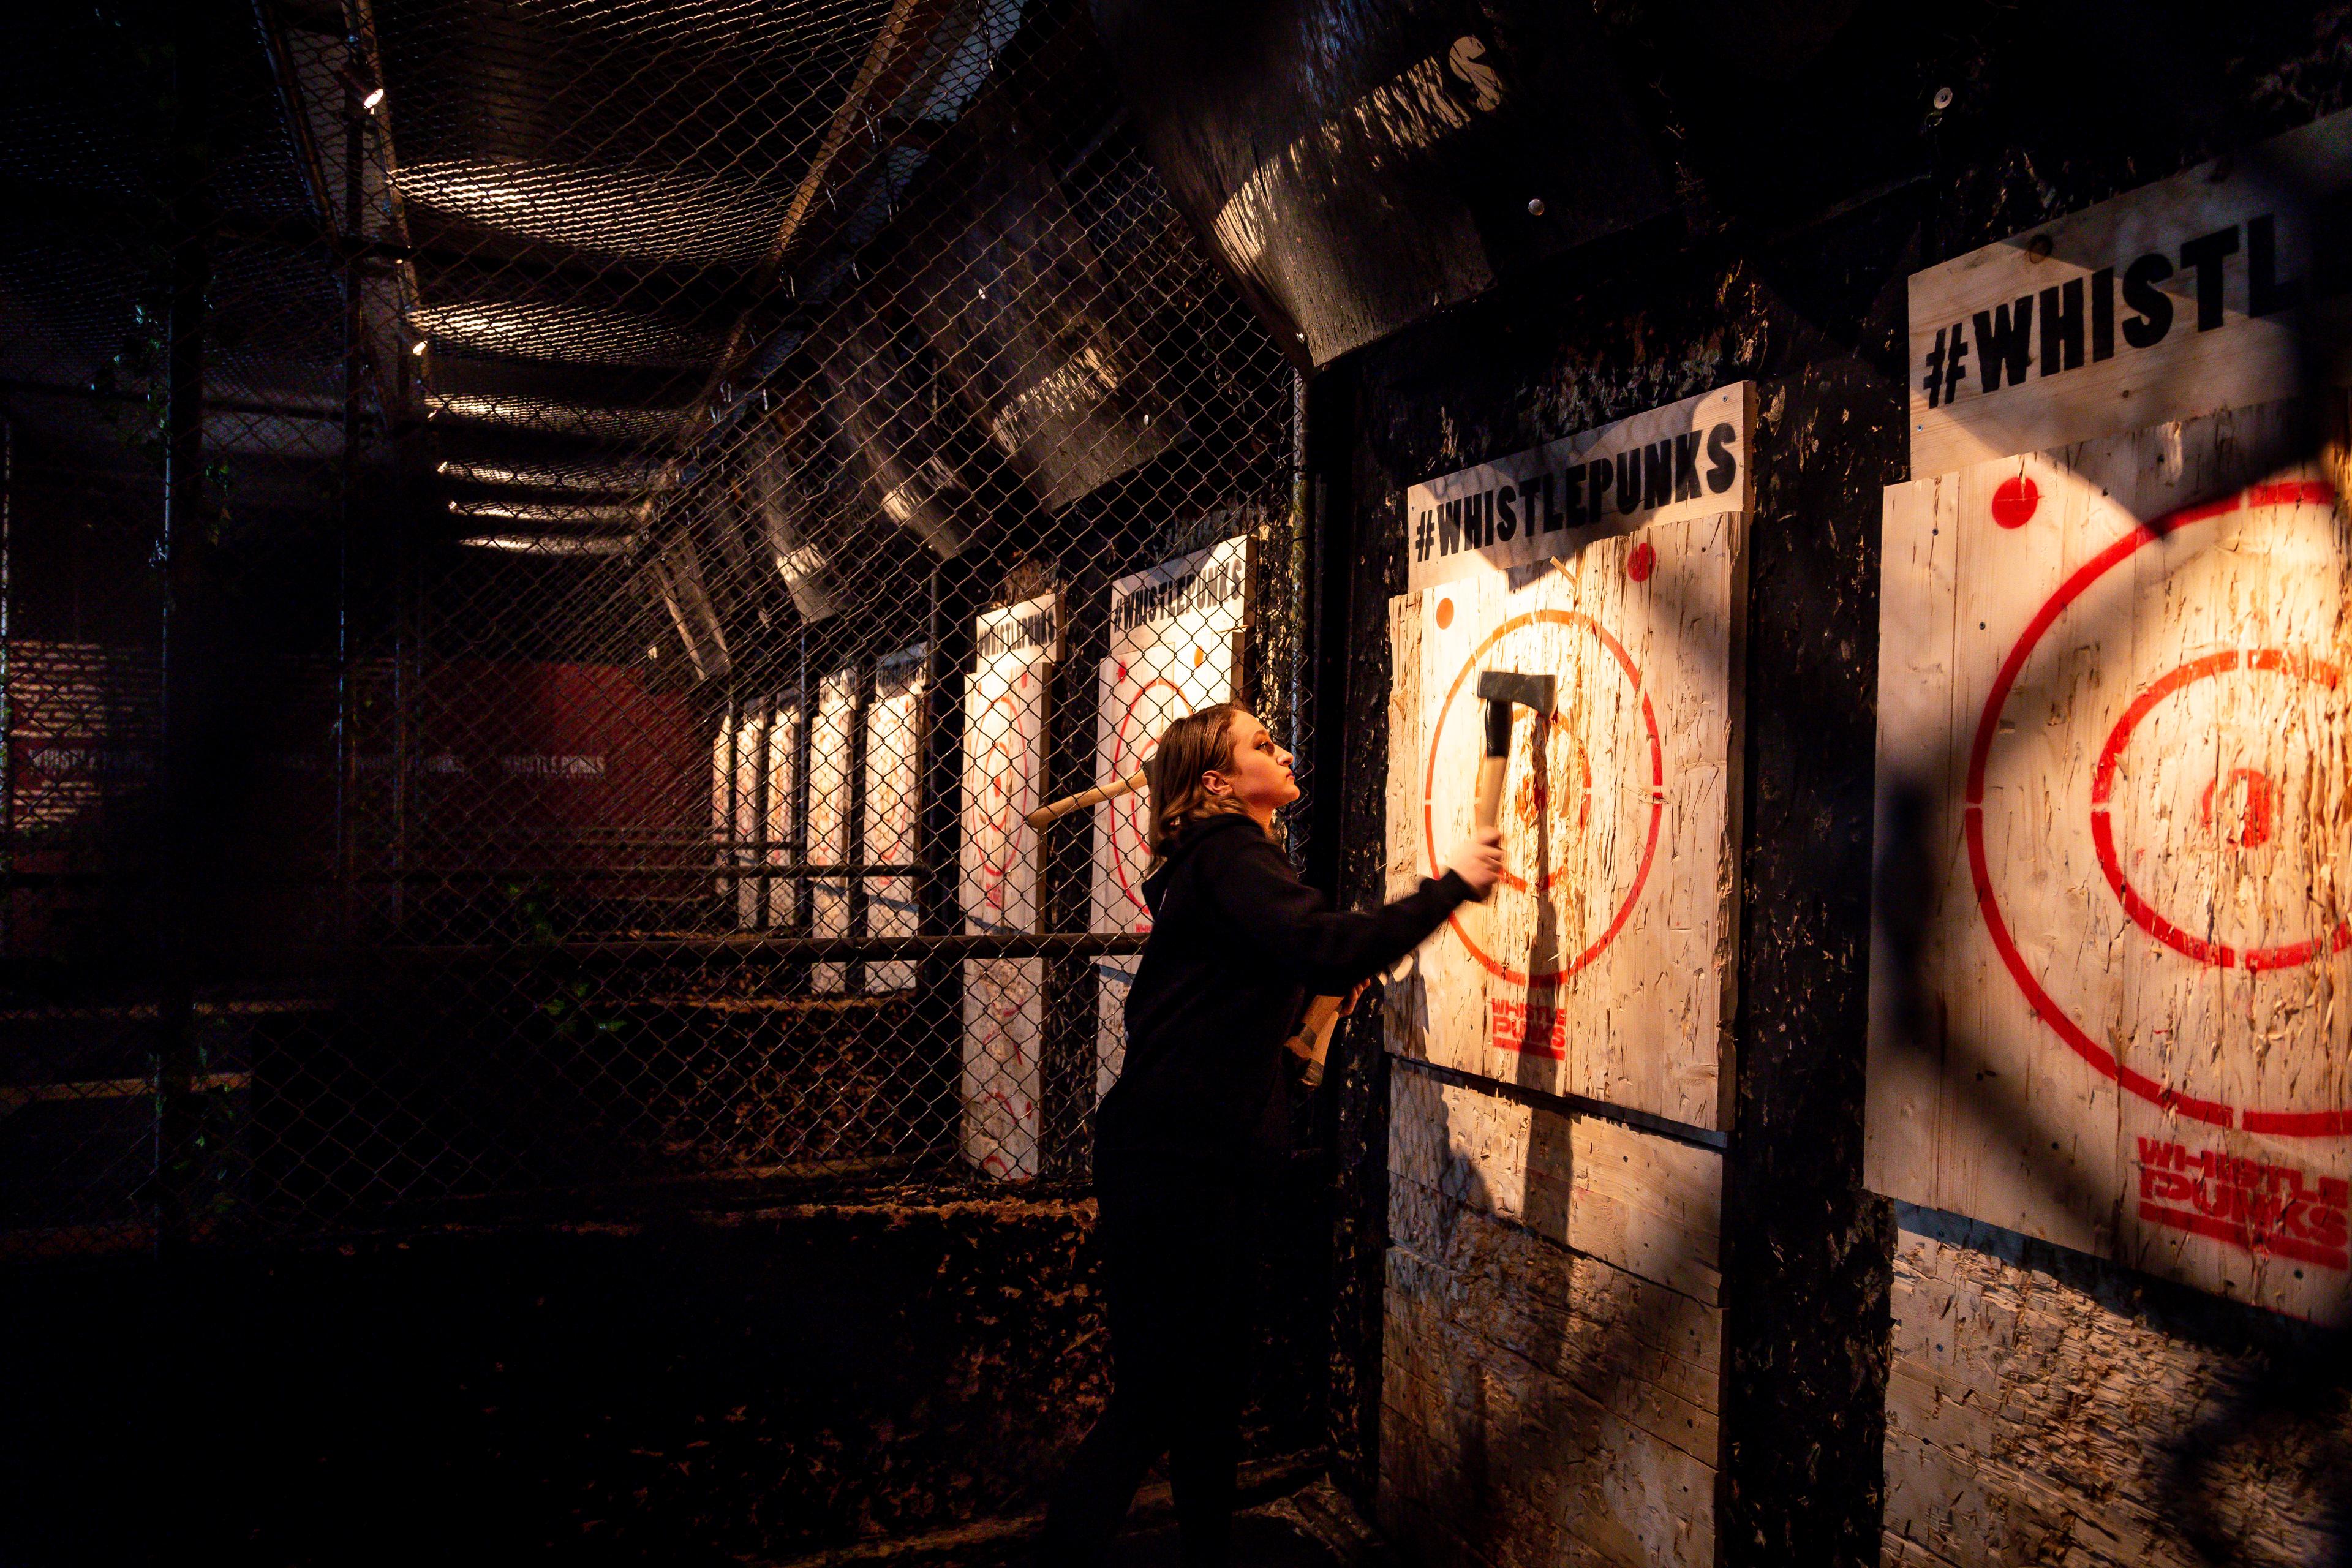 Whistle Punks Urban Axe Throwing Deansgate, Whistle Punks Manchester photo #5